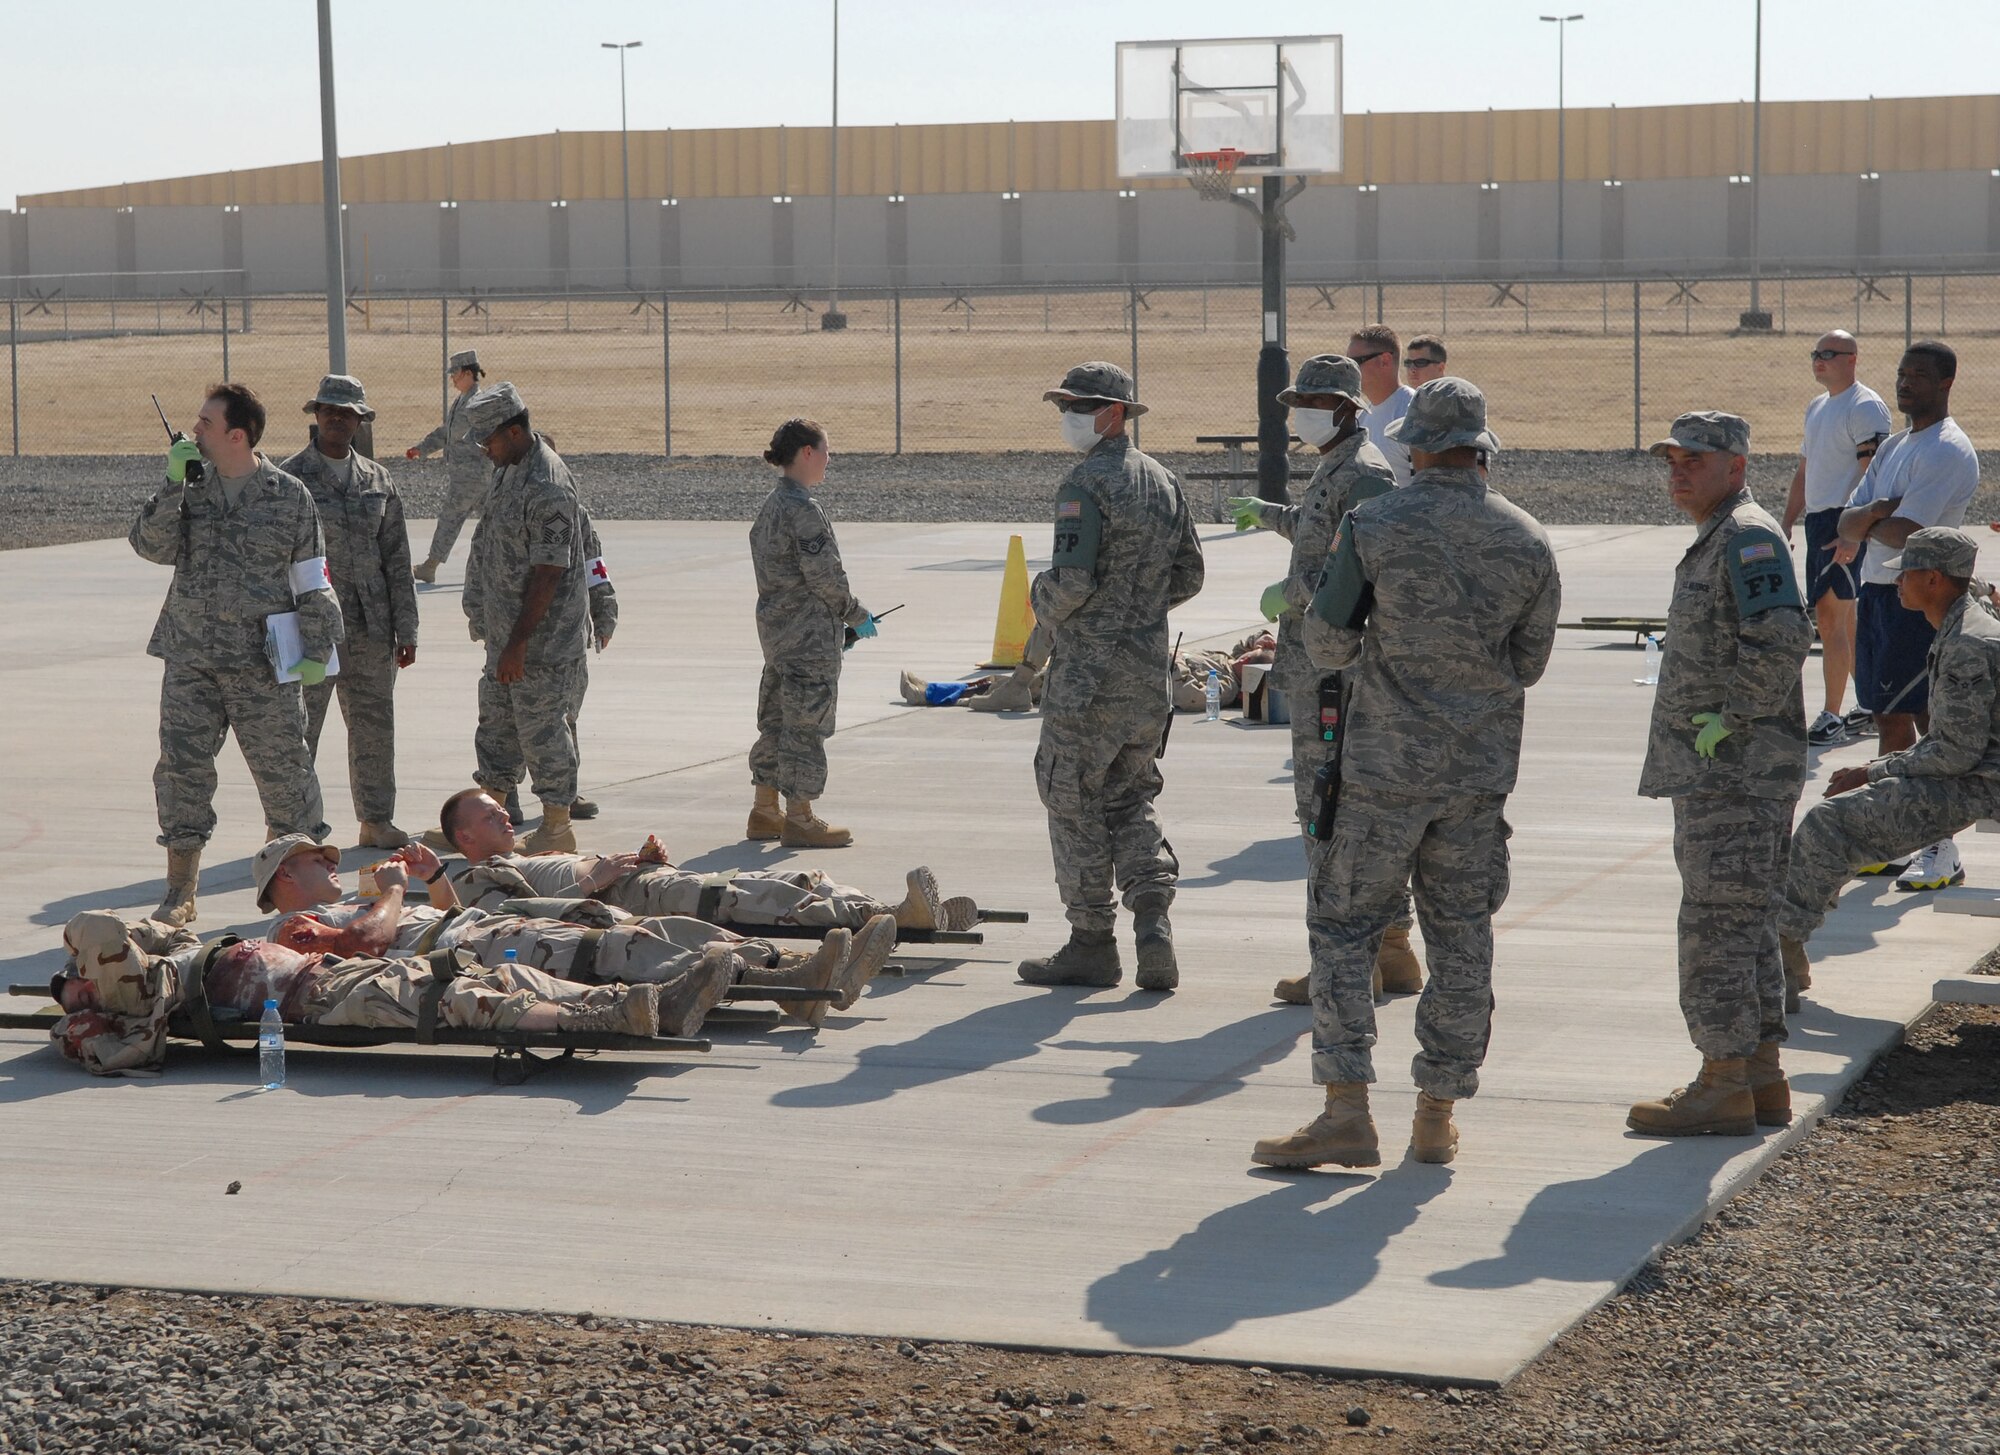 SOUTHWEST ASIA -- Members of the 380th Expeditionary Medical Group see to simulated victims at the Casualty Collection Point after a simulated terrorist attack here Dec. 12. The deployed Airmen are all part of an exercise which tests and evaluates the 380th Air Expeditionary Wing's response to real-world scenarios. (US Air Force photo by Tech. Sgt. Denise Johnson) (released)